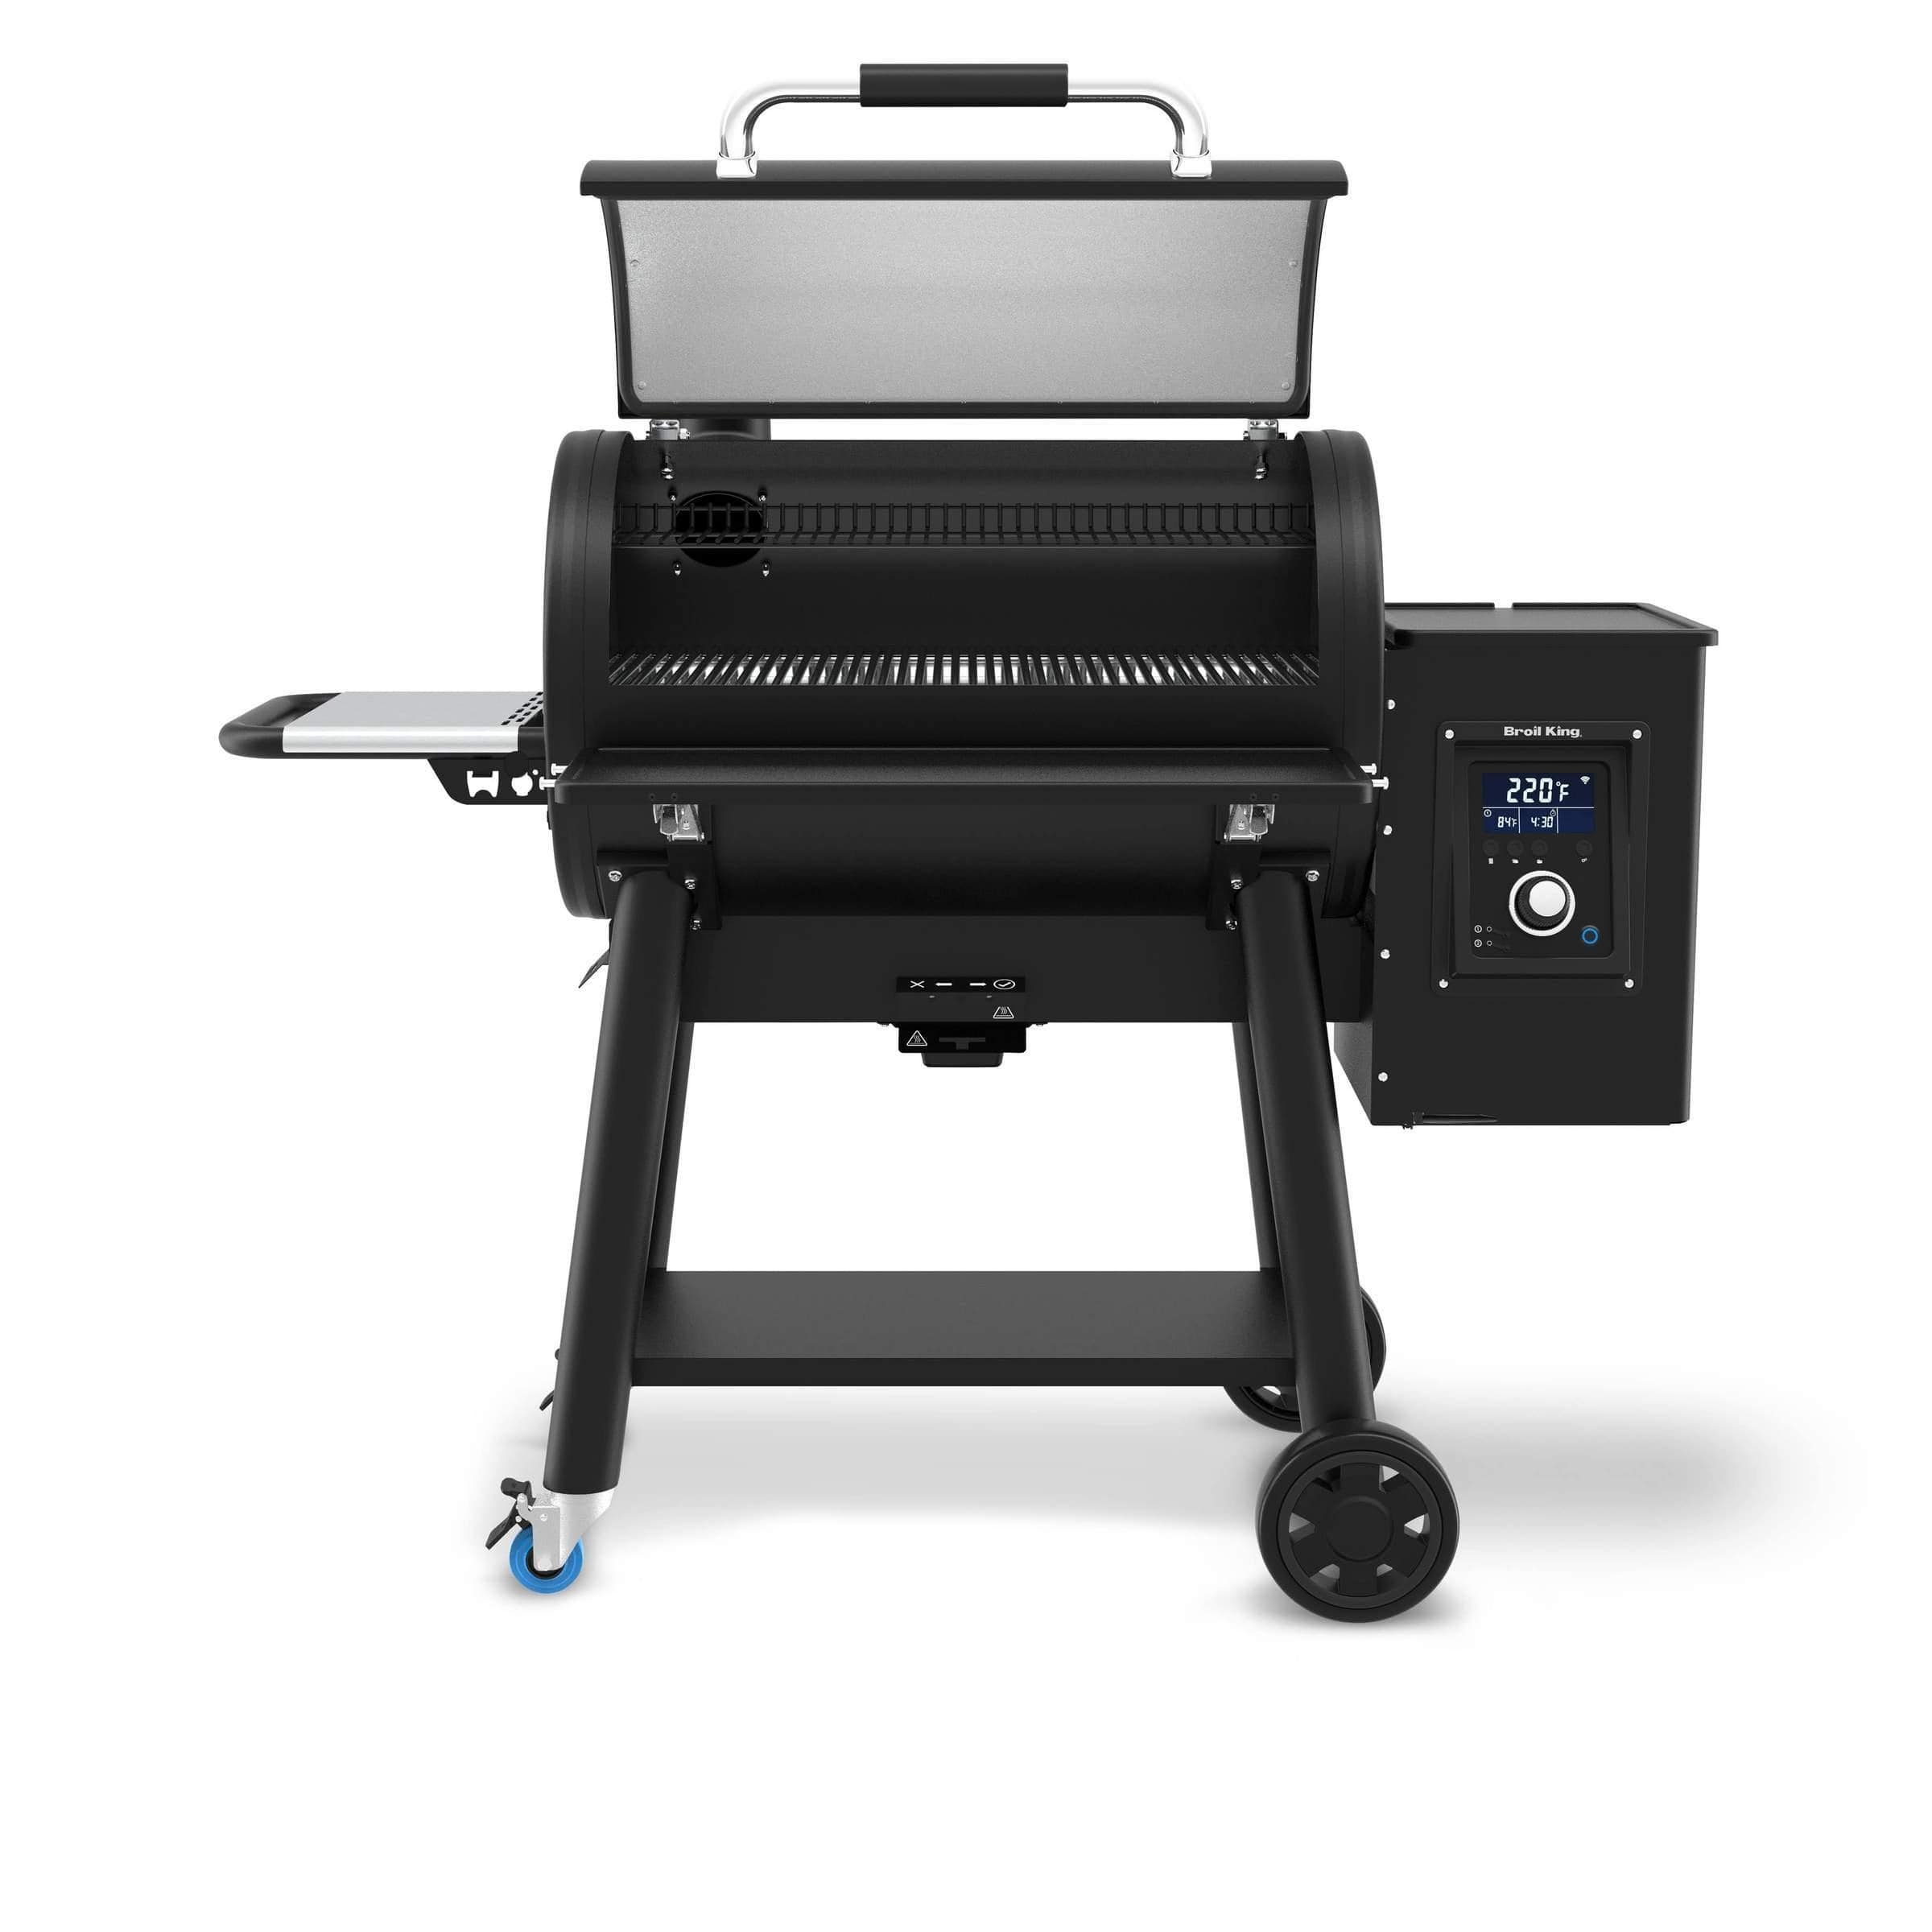 Broil King Built in Grills Broil King Regal Pellet 500 Pro Wi-Fi & Bluetooth Controlled 32-Inch Pellet Grill - 2021 Model